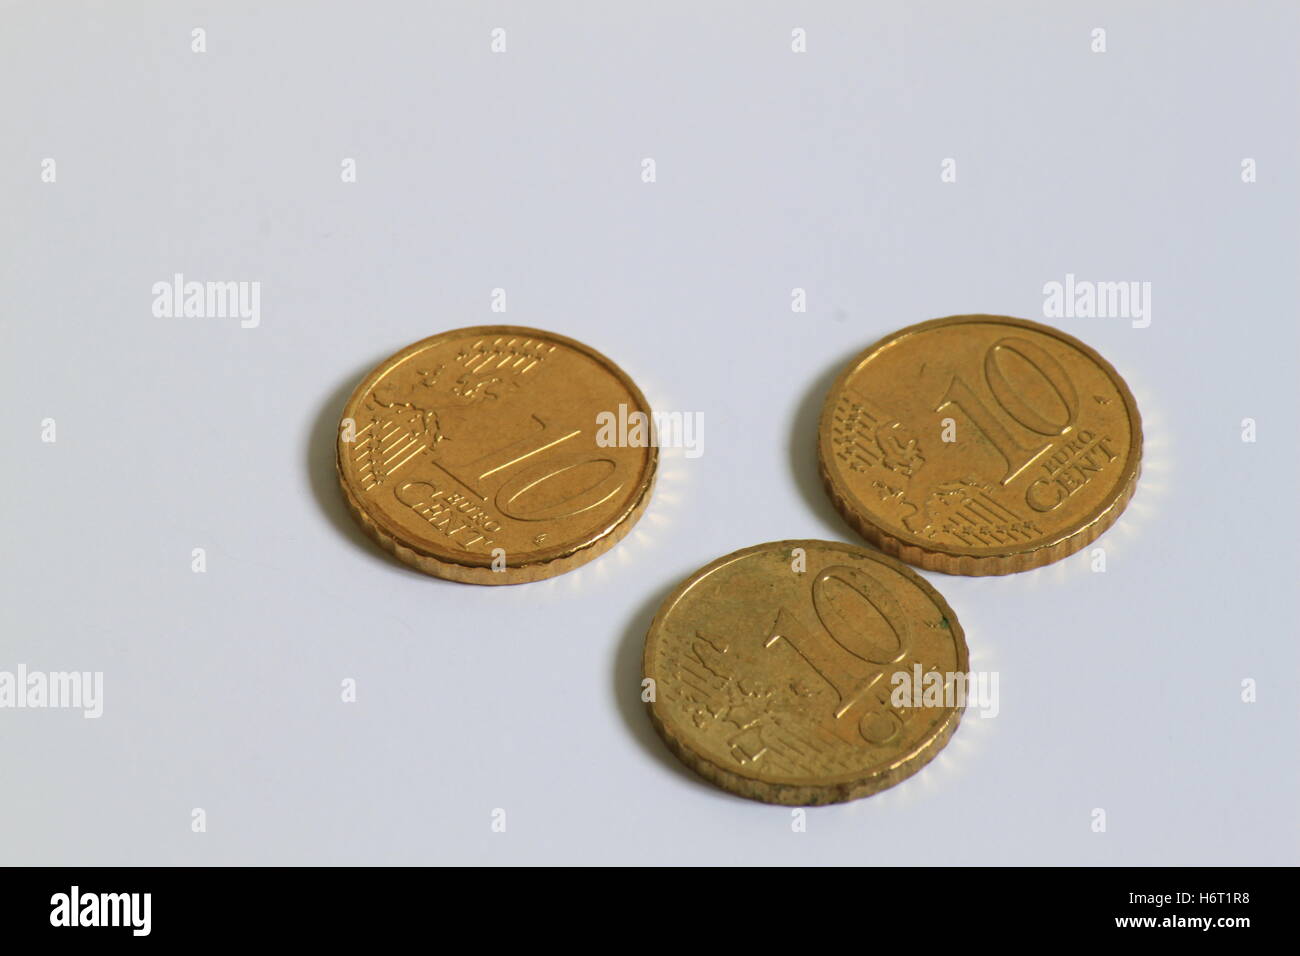 sell euro coin save buy cent money sell slovakia greece austria euro europe coin spain save germany german federal republic Stock Photo